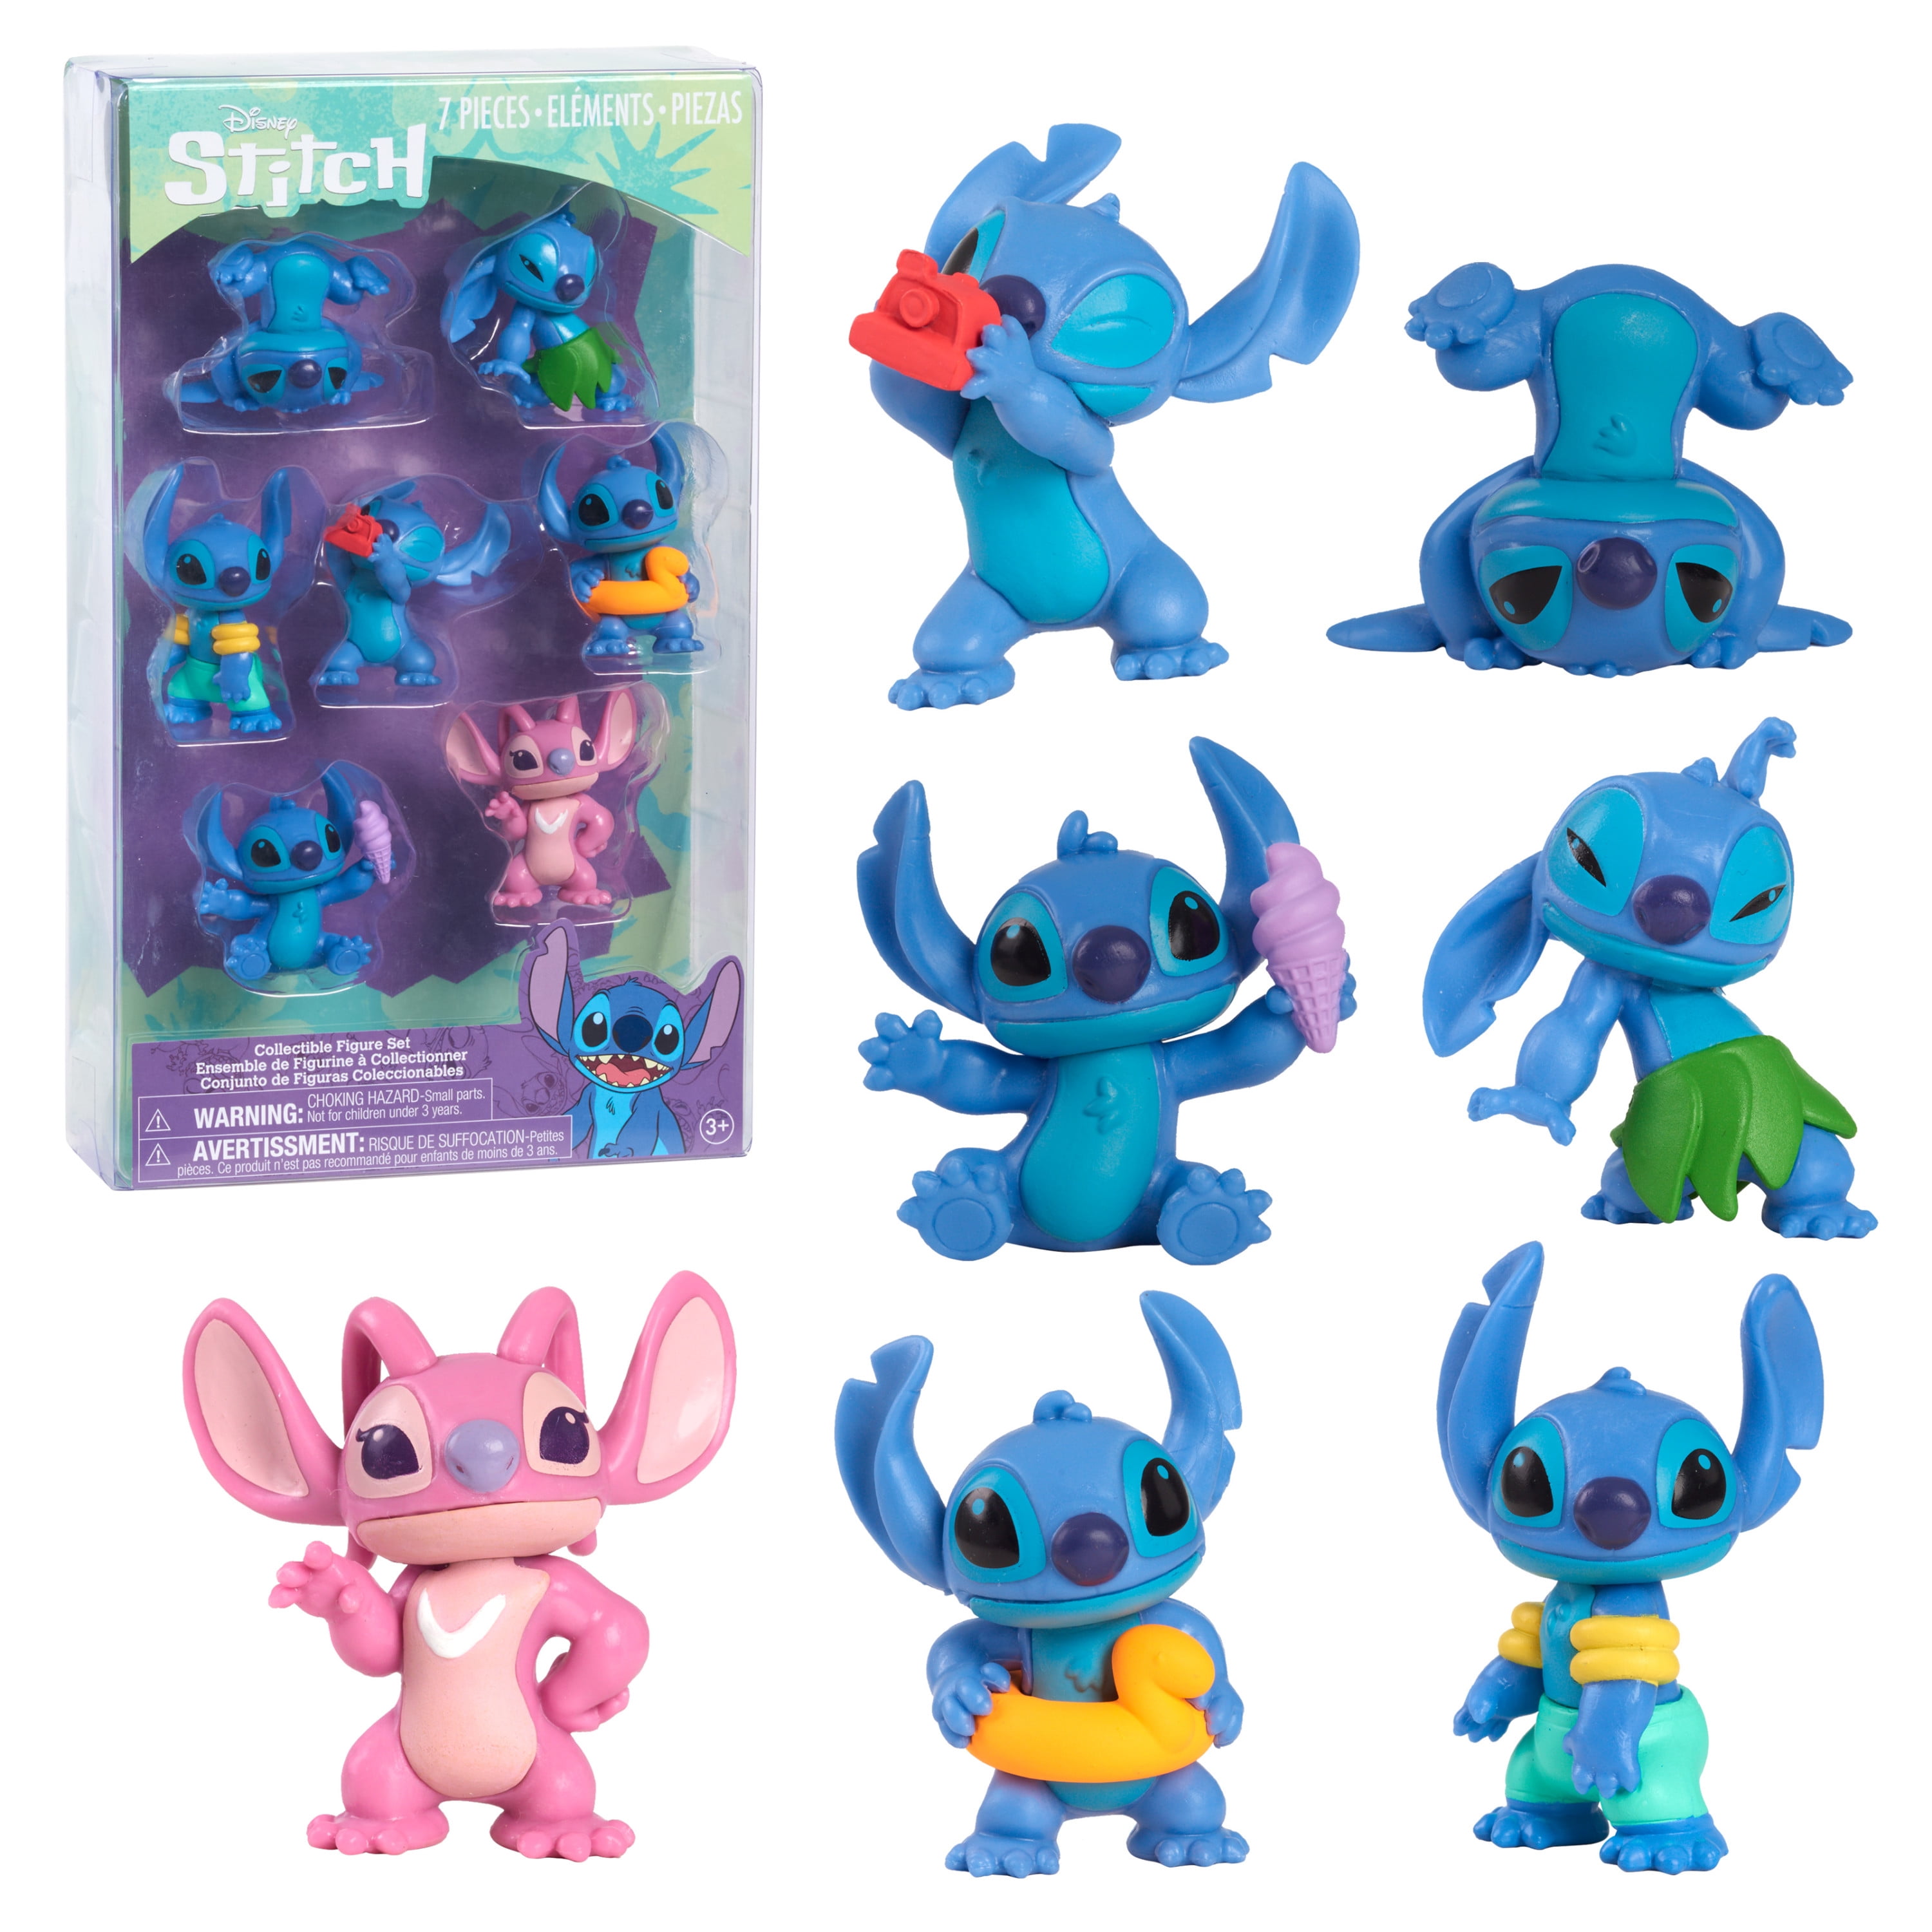 Disney Stitch 7-Piece Collectible Figure Set, Kids Toys for Ages 3 Up, Size: 6.0 inches; 2.0 inches; 10.0 Inches